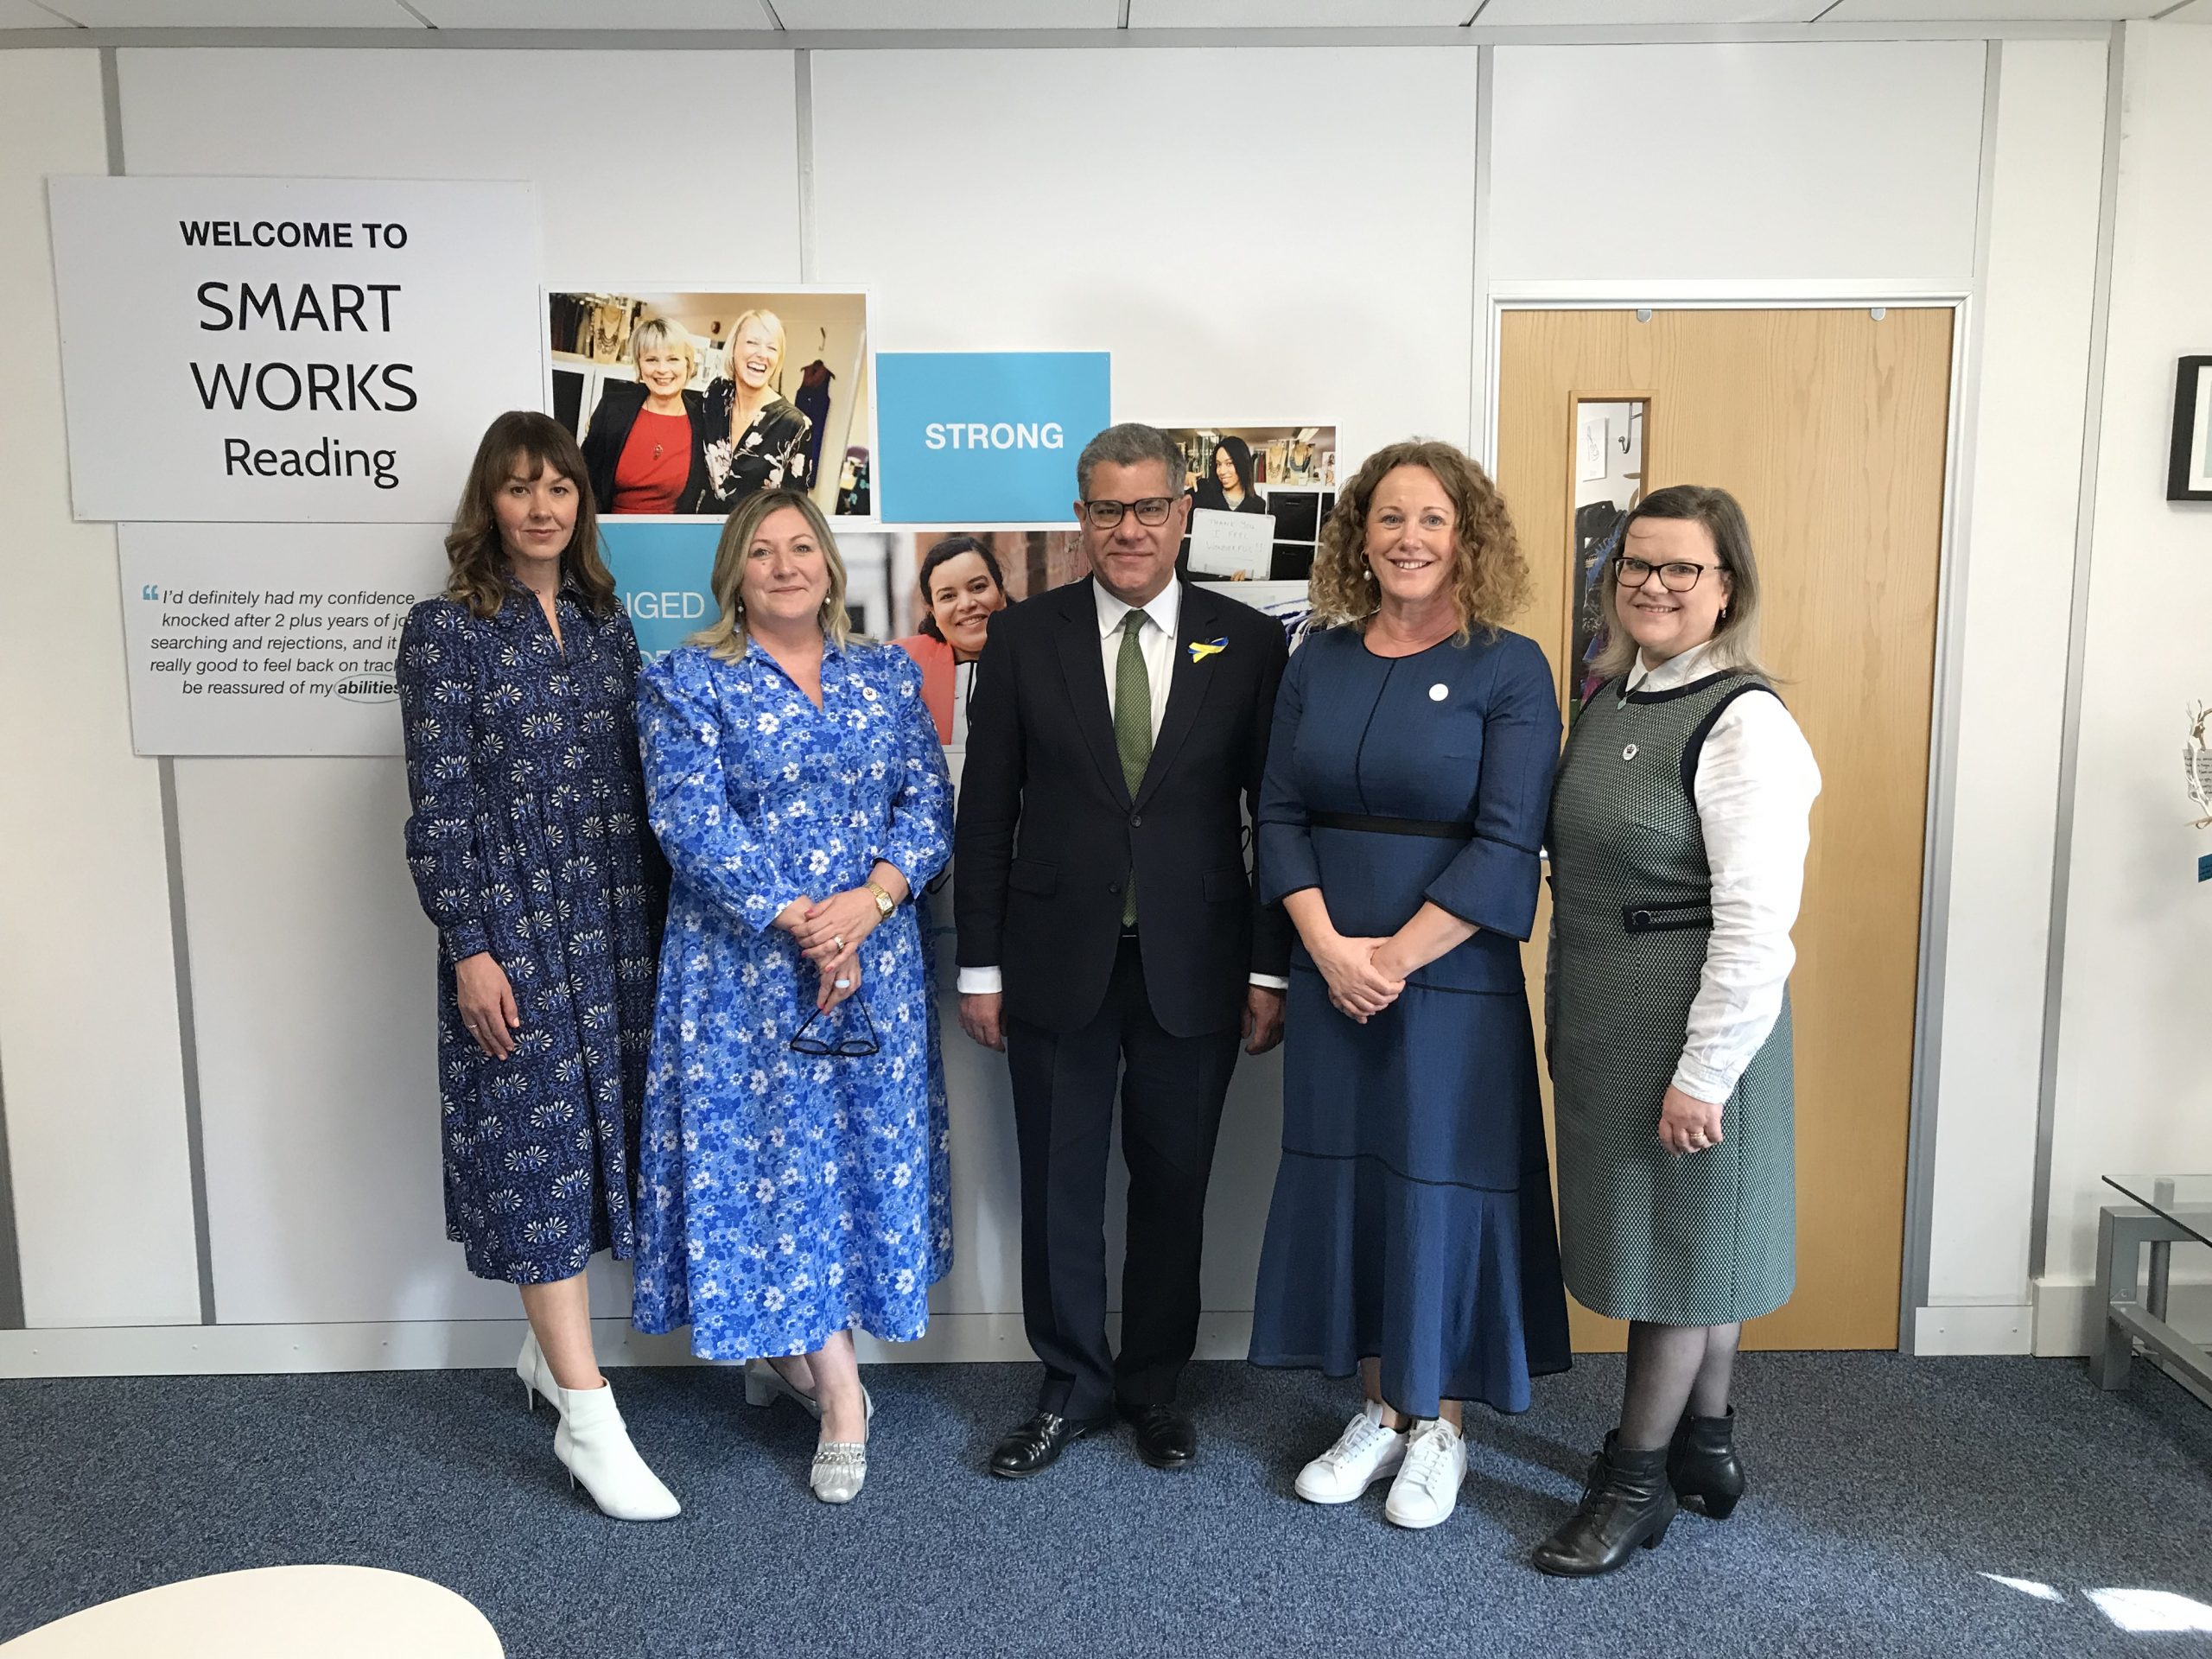 Alok Sharma MP Visits Smart Works Reading’s New Centre image